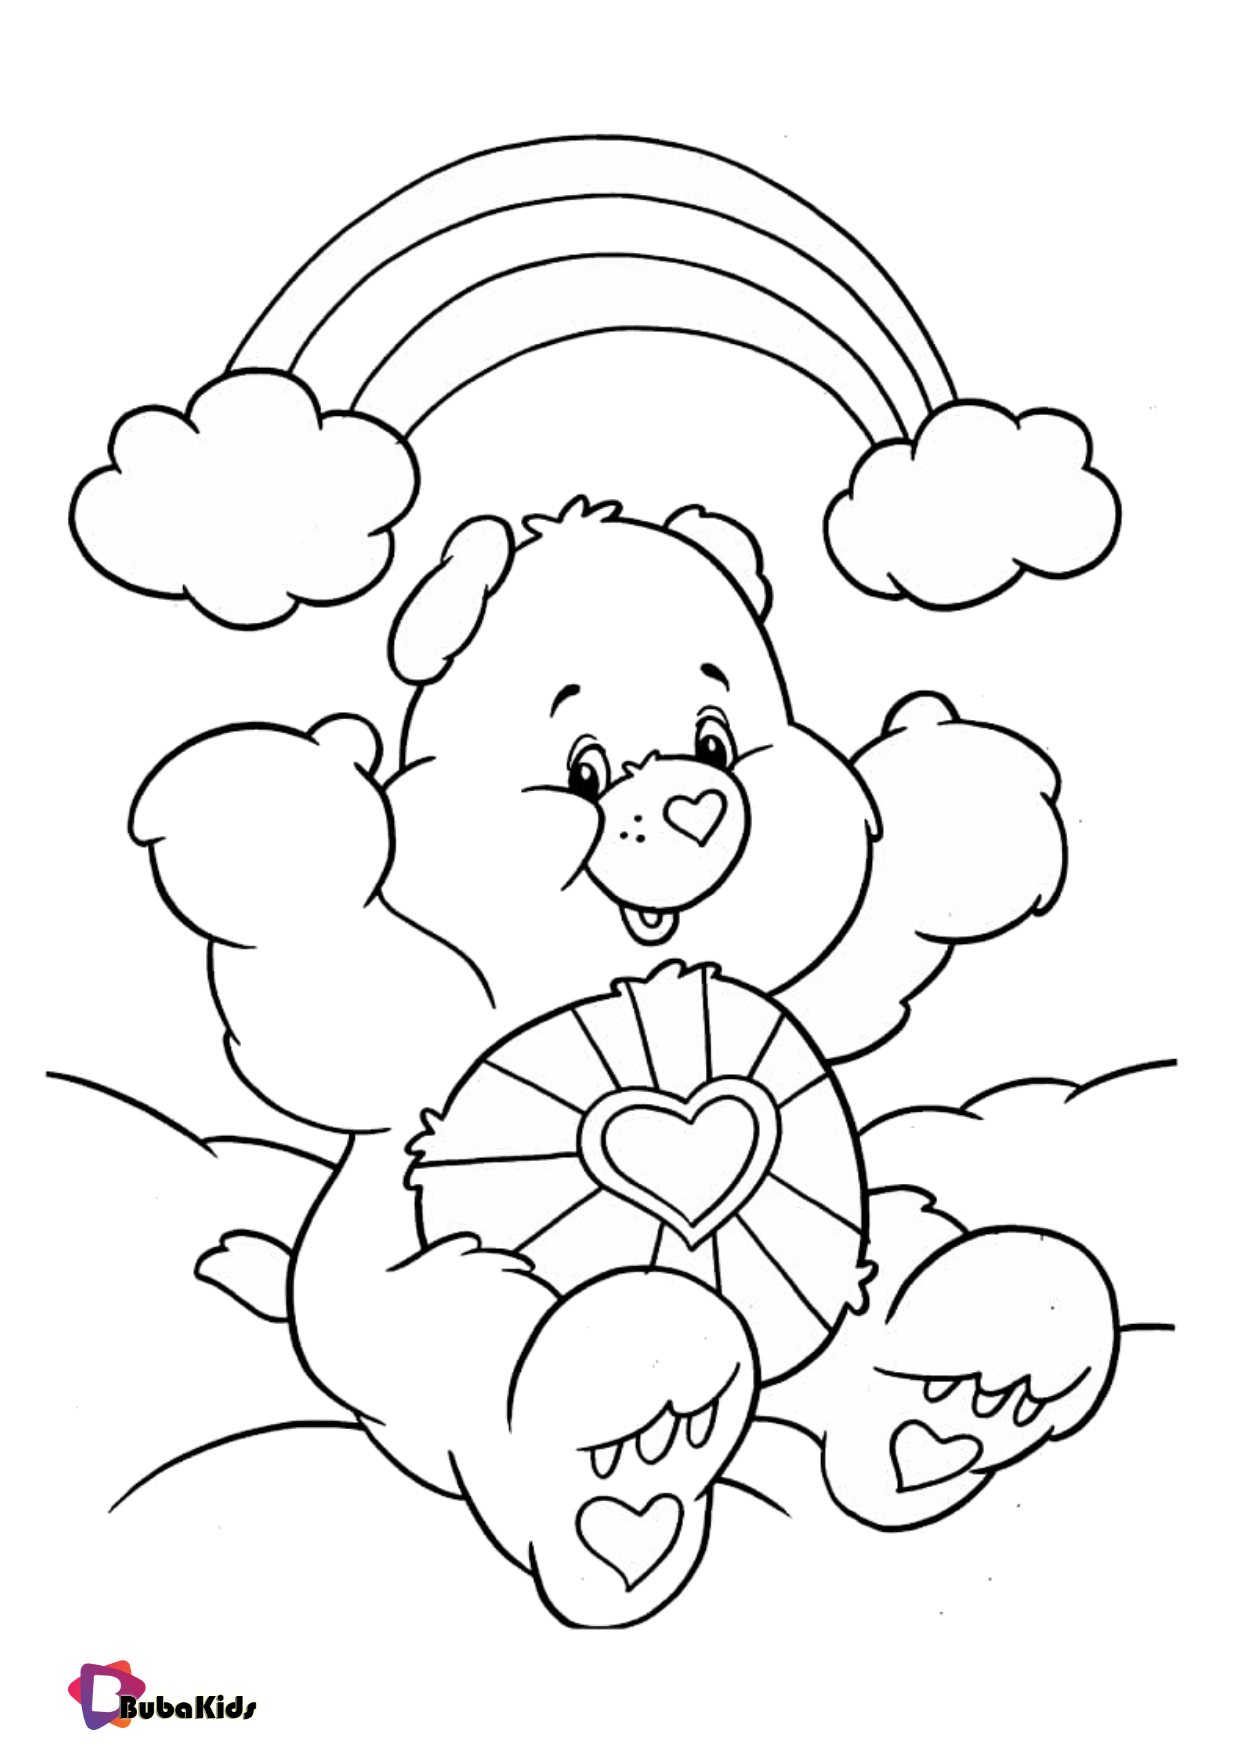 Cute bear and rainbow coloring page